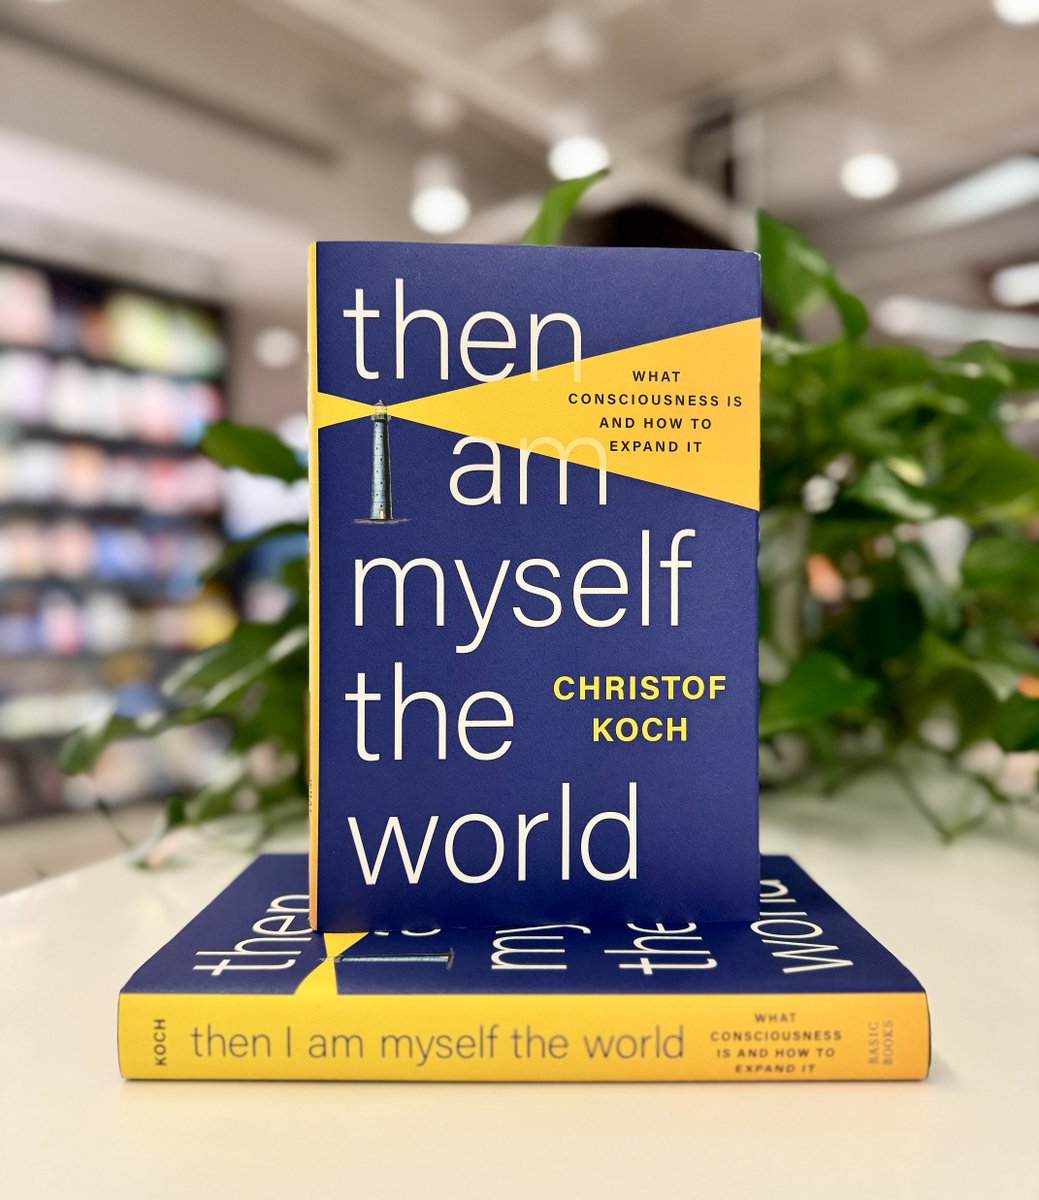 Christof Koch's new book, THEN I AM MYSELF THE WORLD, is hitting the shelves today! This is 'a remarkable must-read for anyone interested in knowing their mind.”―@judbrewer Learn more: bit.ly/4a5YkMi #consciousness